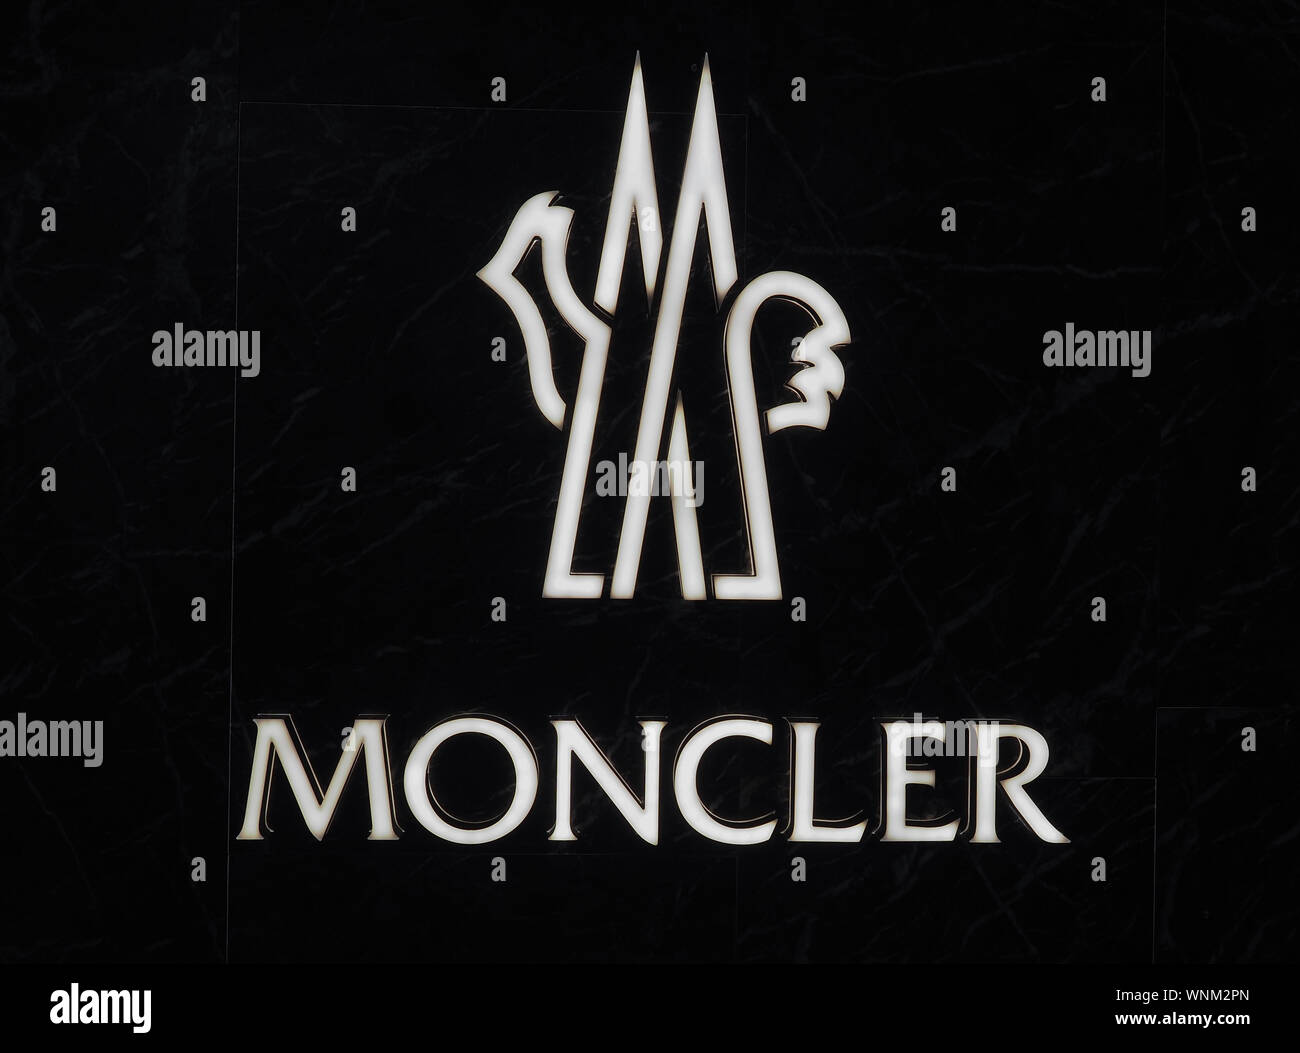 KOELN, GERMANY - CIRCA AUGUST 2019: Moncler sign Stock Photo - Alamy